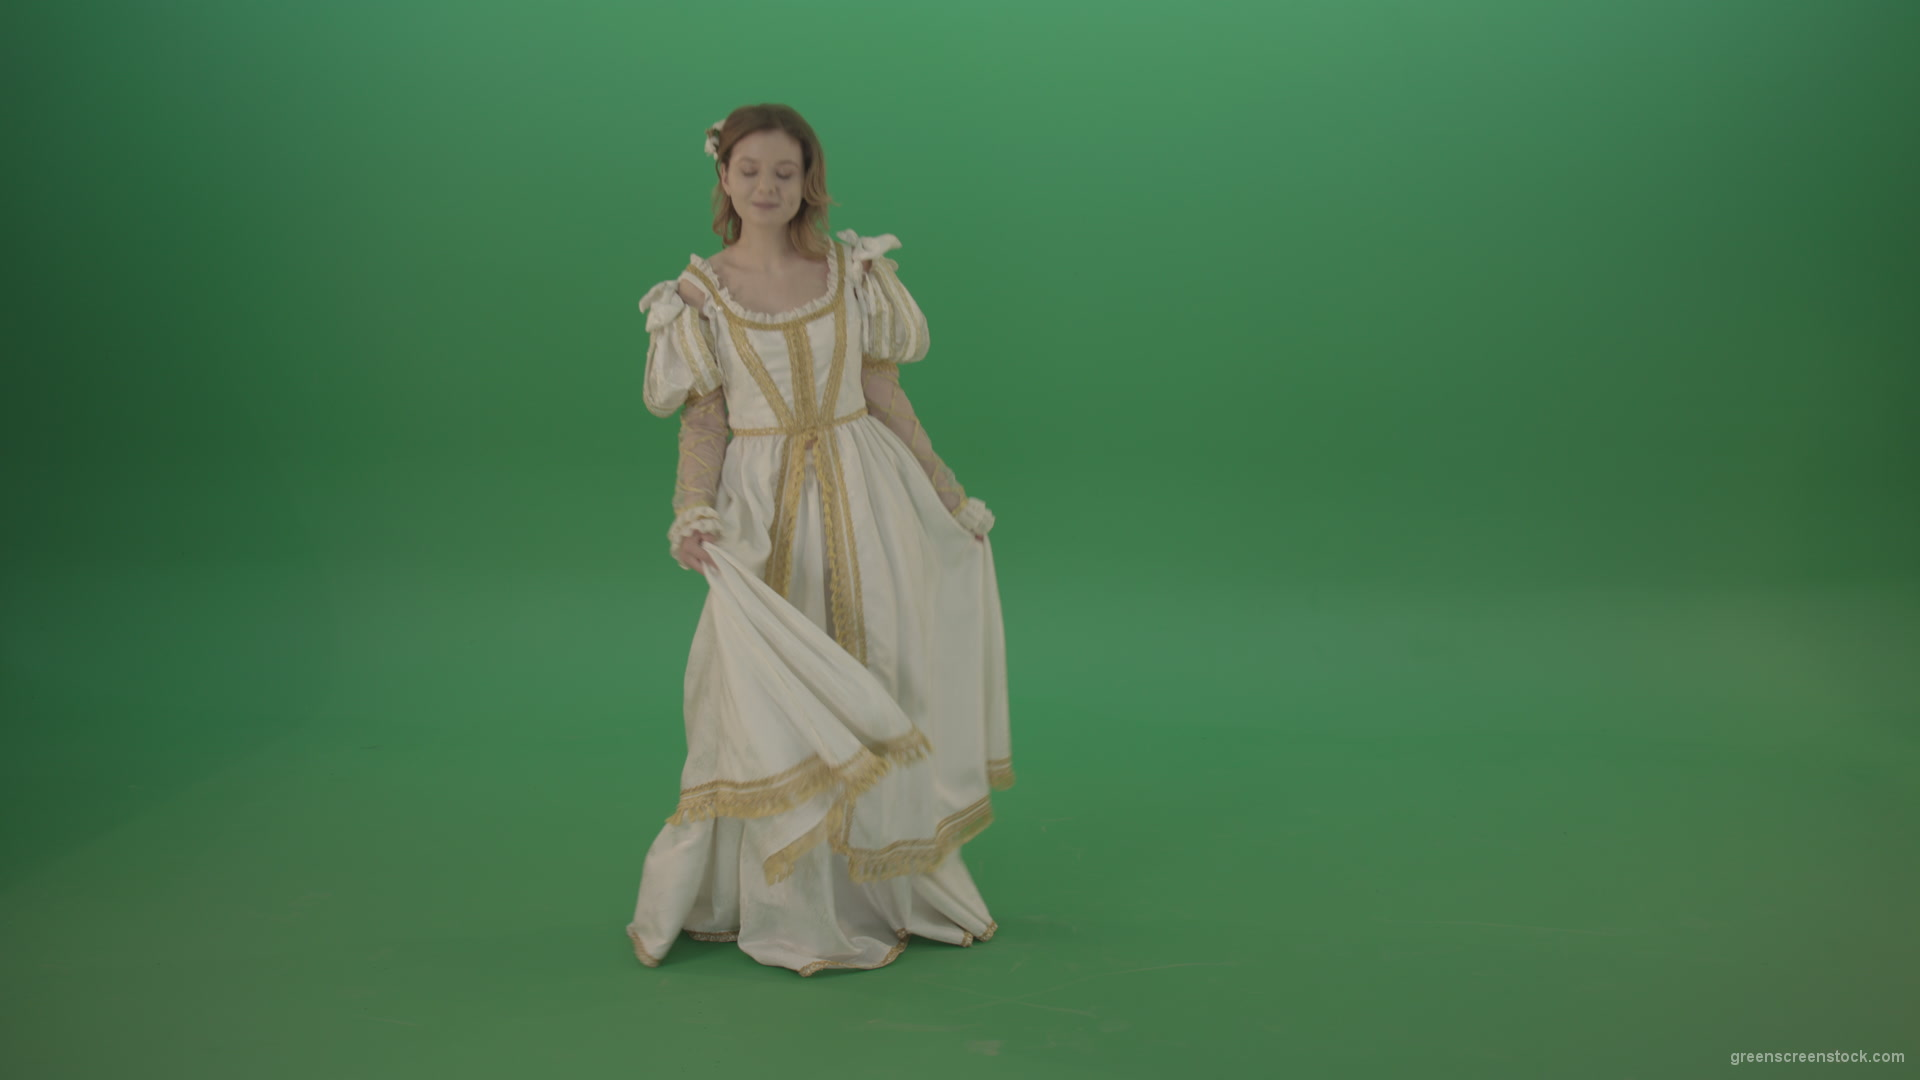 Easy-bowed-girl-is-happy-to-meet-isolated-on-green-screen_004 Green Screen Stock